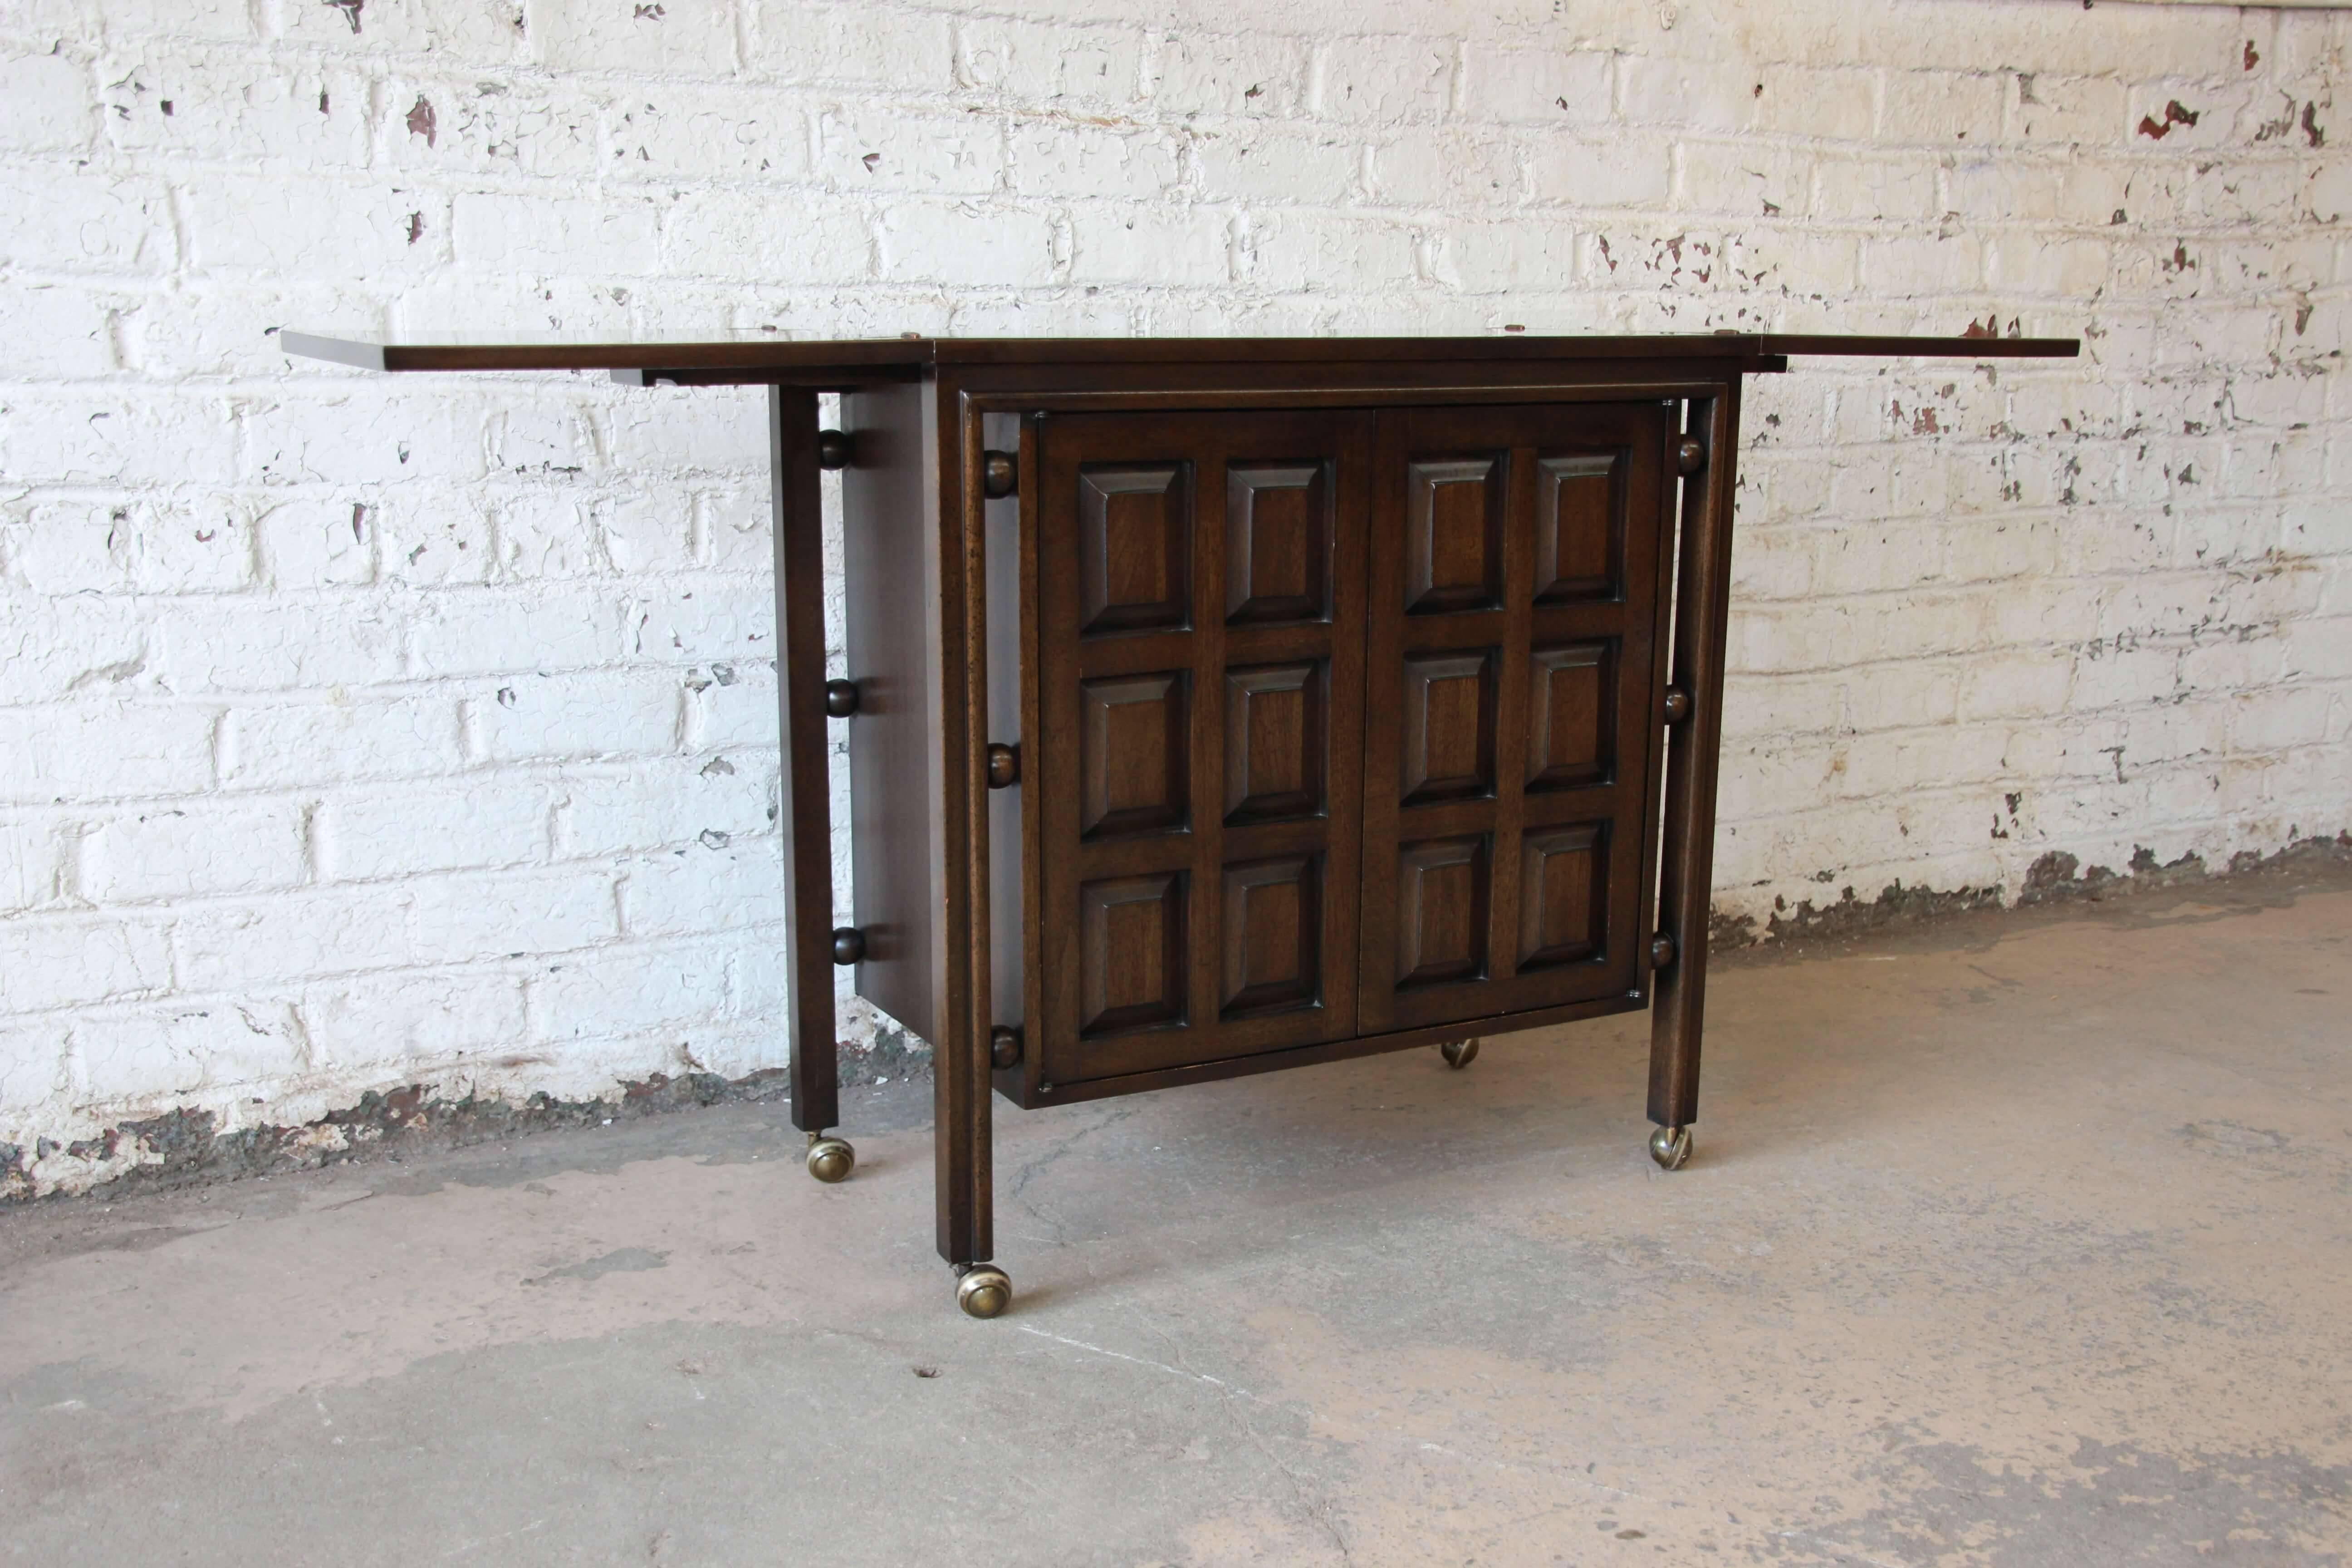 Offering a gorgeous vintage dark walnut Spanish Colonial style bar cart by John Widdicomb. The cart features rich walnut grain and a unique Spanish design. The doors open to reveal a single dovetailed drawer, three glass shelves, and wine glass